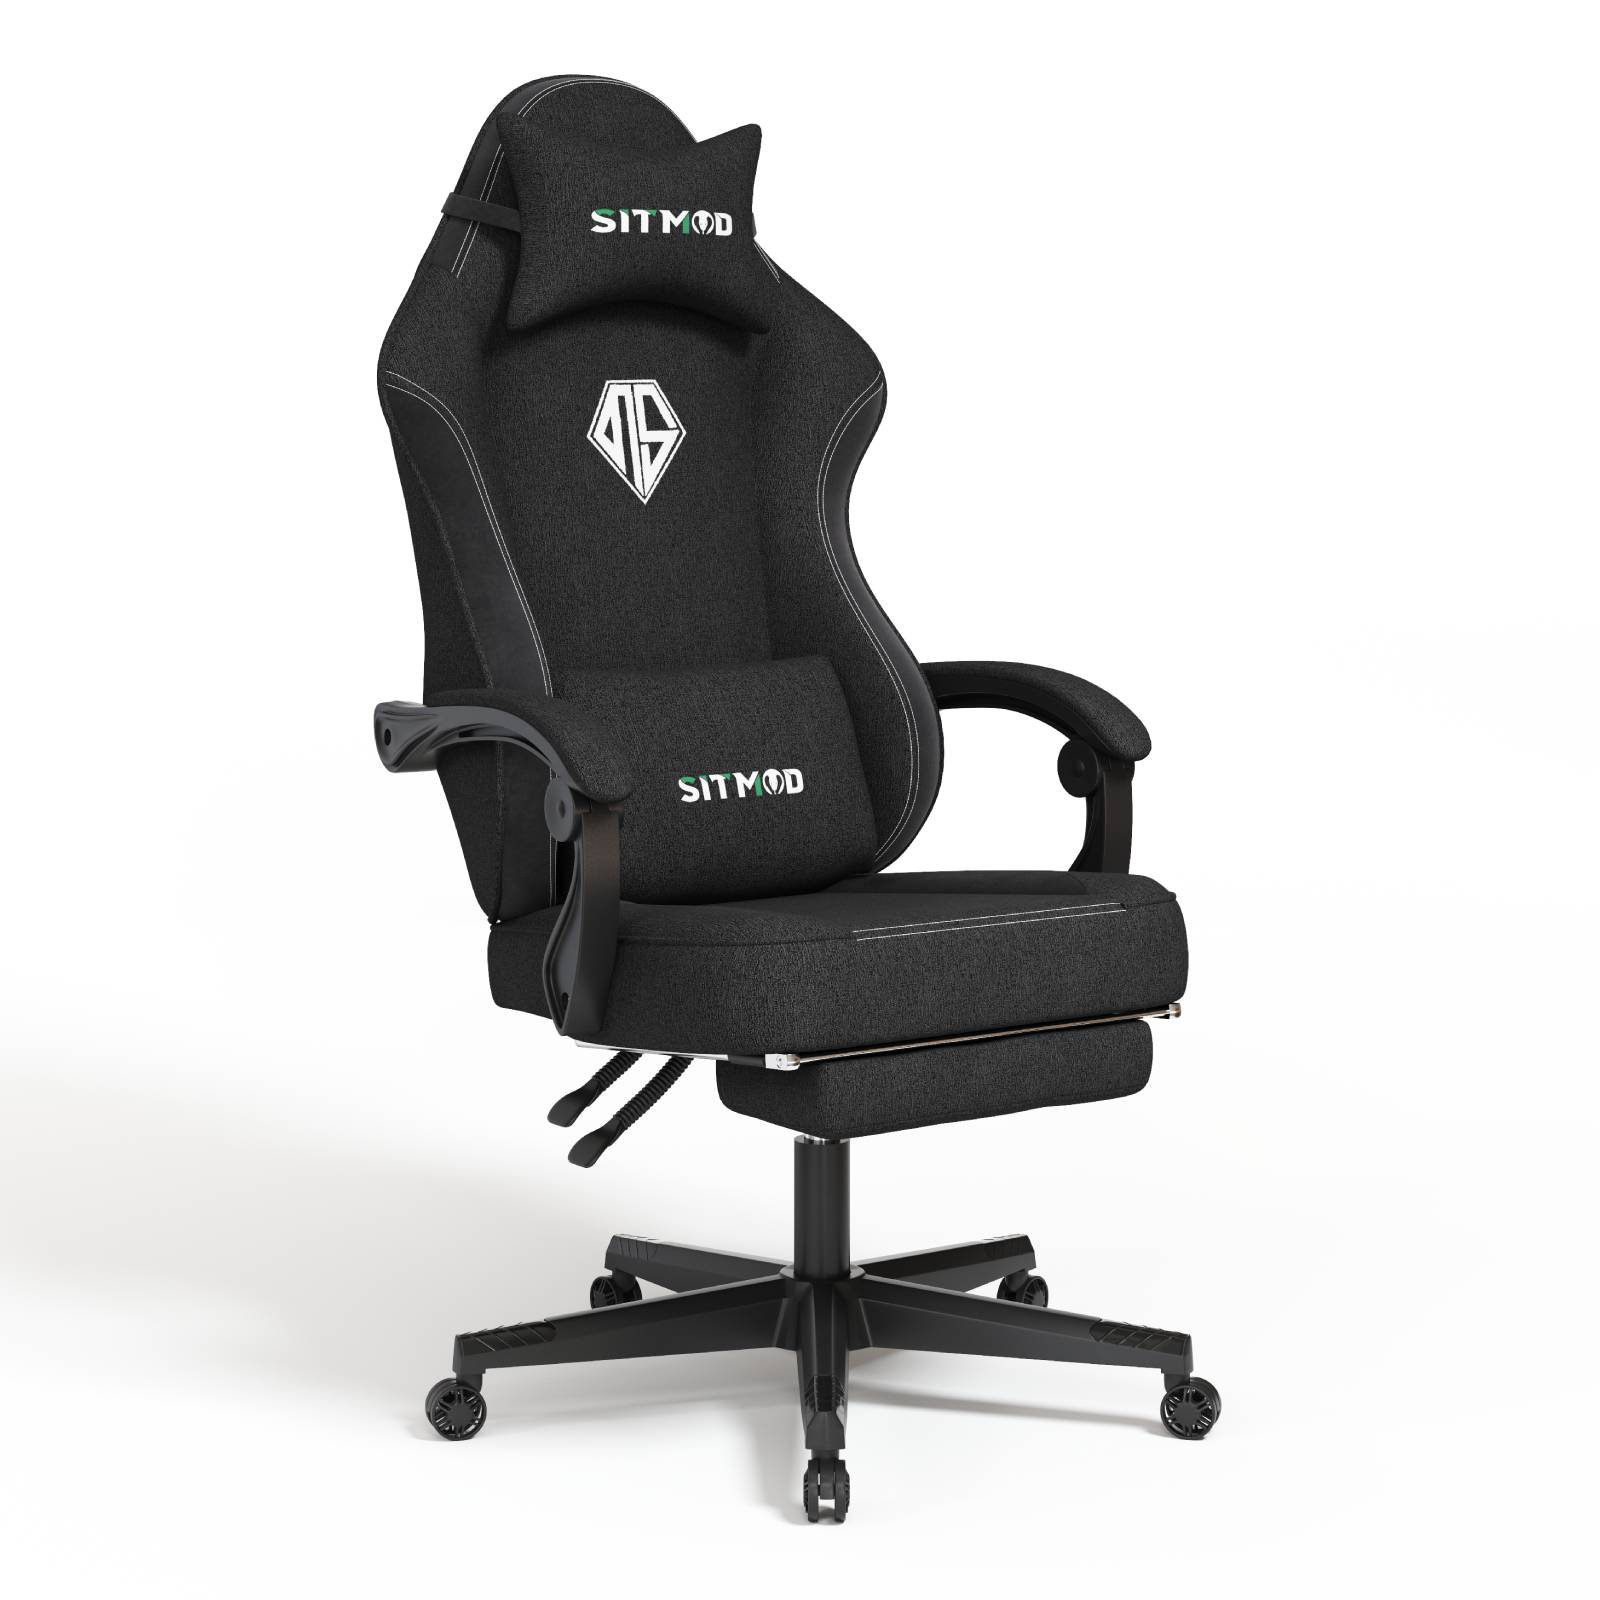 Gaming Office Chair with Extendable Leg Rest, Black Fabric Upholstery